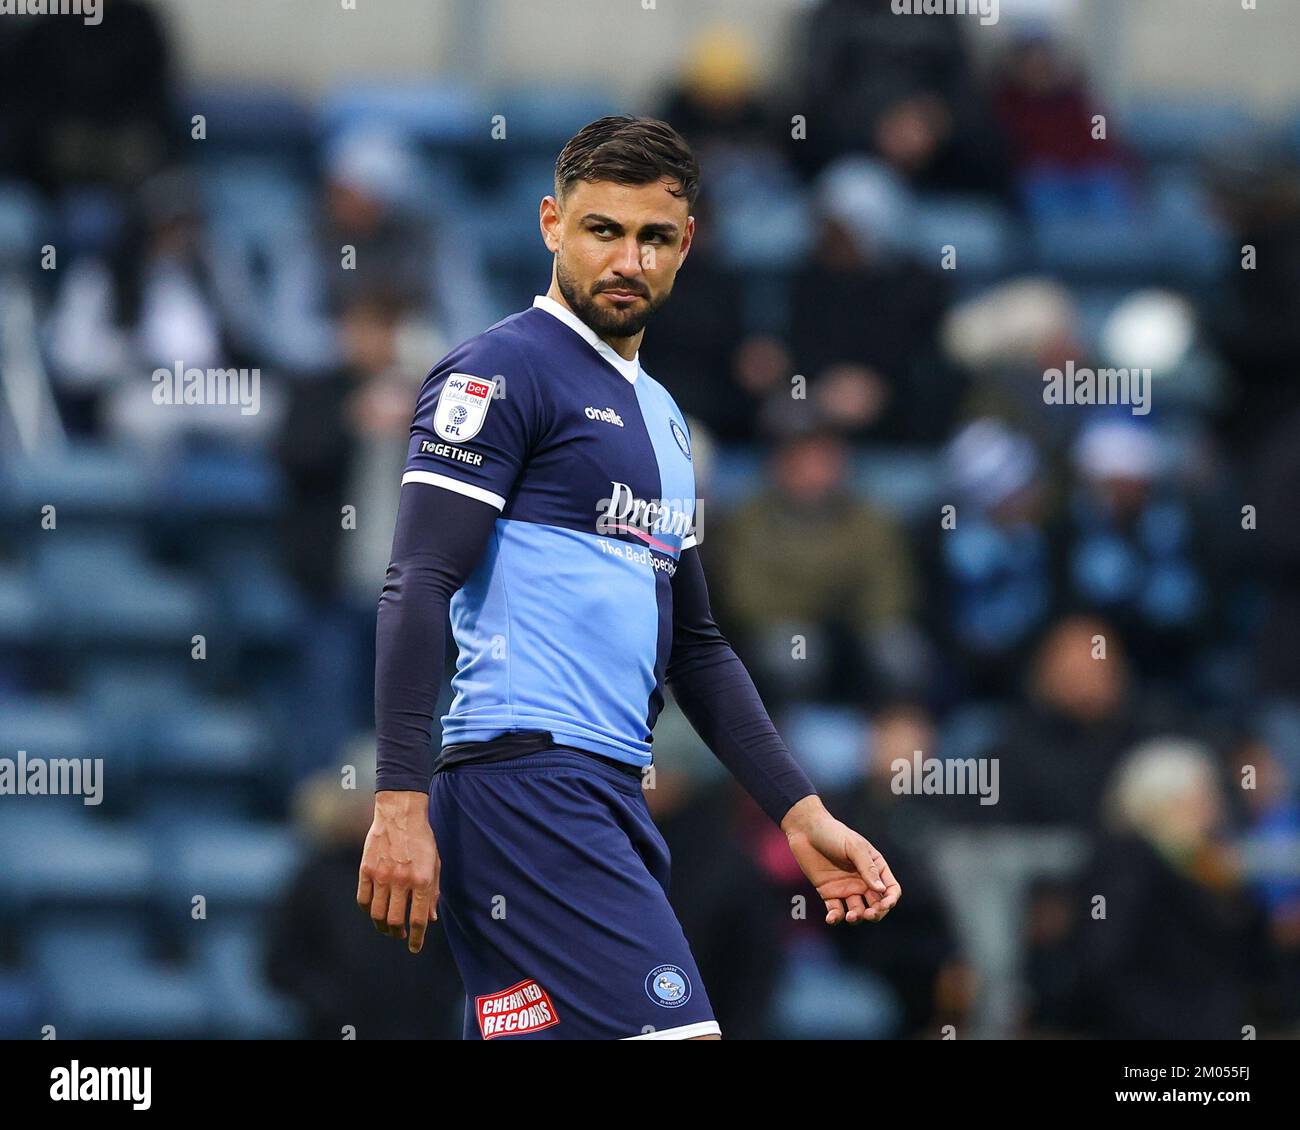 High Wycombe, UK. 04th Dec, 2022. Ryan Tafazolli of Wycombe Wanderers during the Sky Bet League 1 match Wycombe Wanderers vs Portsmouth at Adams Park, High Wycombe, United Kingdom, 4th December 2022 (Photo by Nick Browning/News Images) in High Wycombe, United Kingdom on 12/4/2022. (Photo by Nick Browning/News Images/Sipa USA) Credit: Sipa USA/Alamy Live News Stock Photo